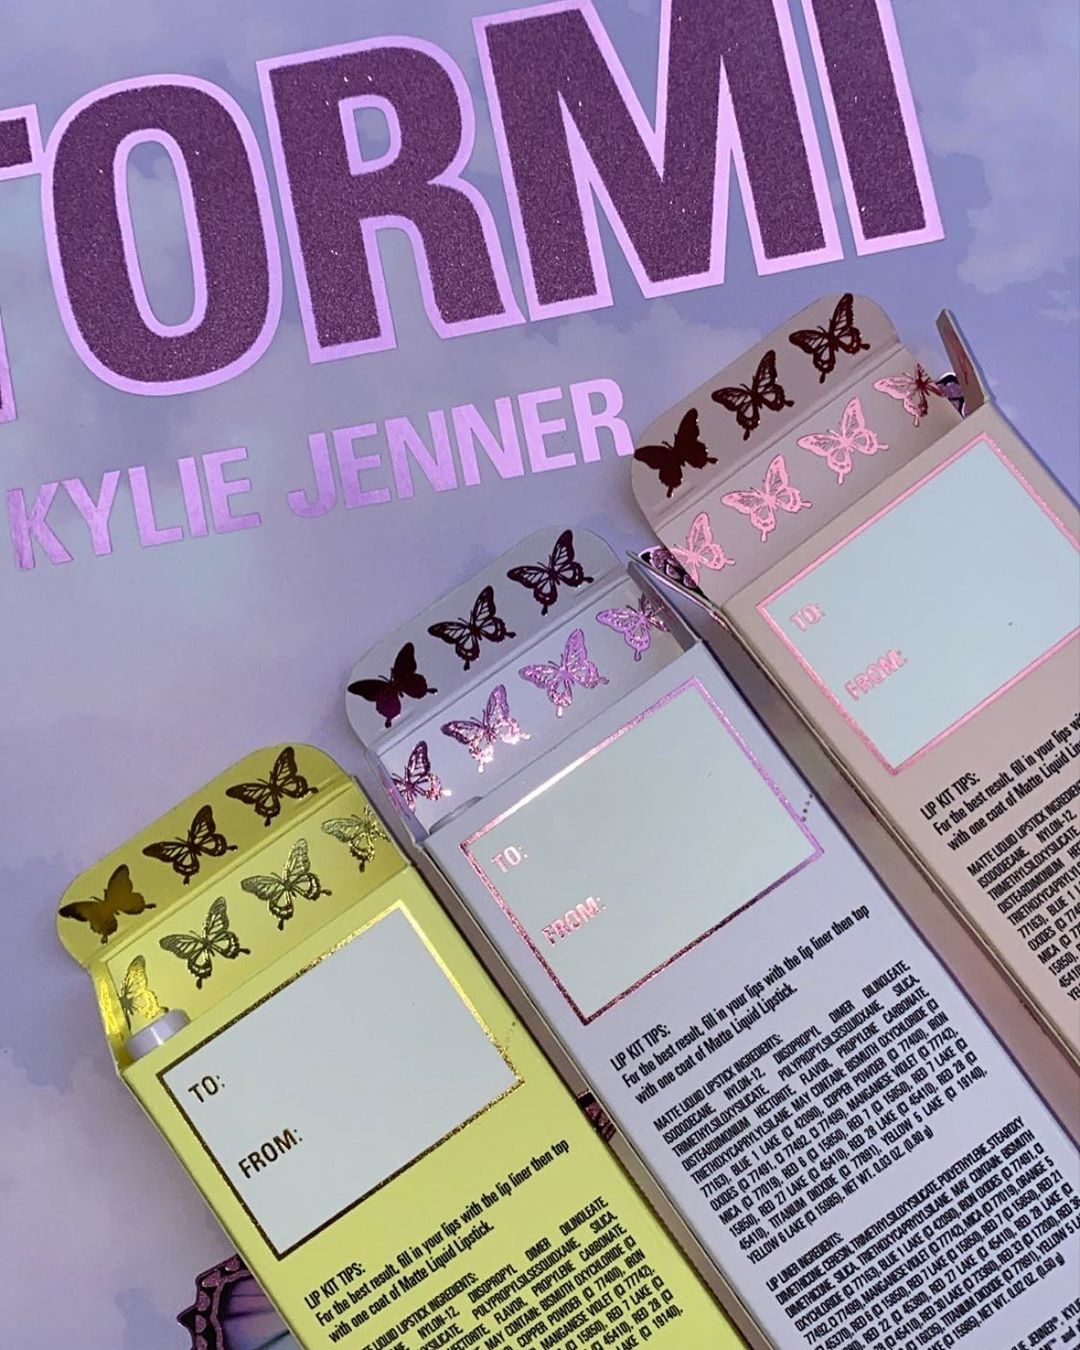 kylie-jenner-releases-new-makeup-inspired-by-stormi-style-rave